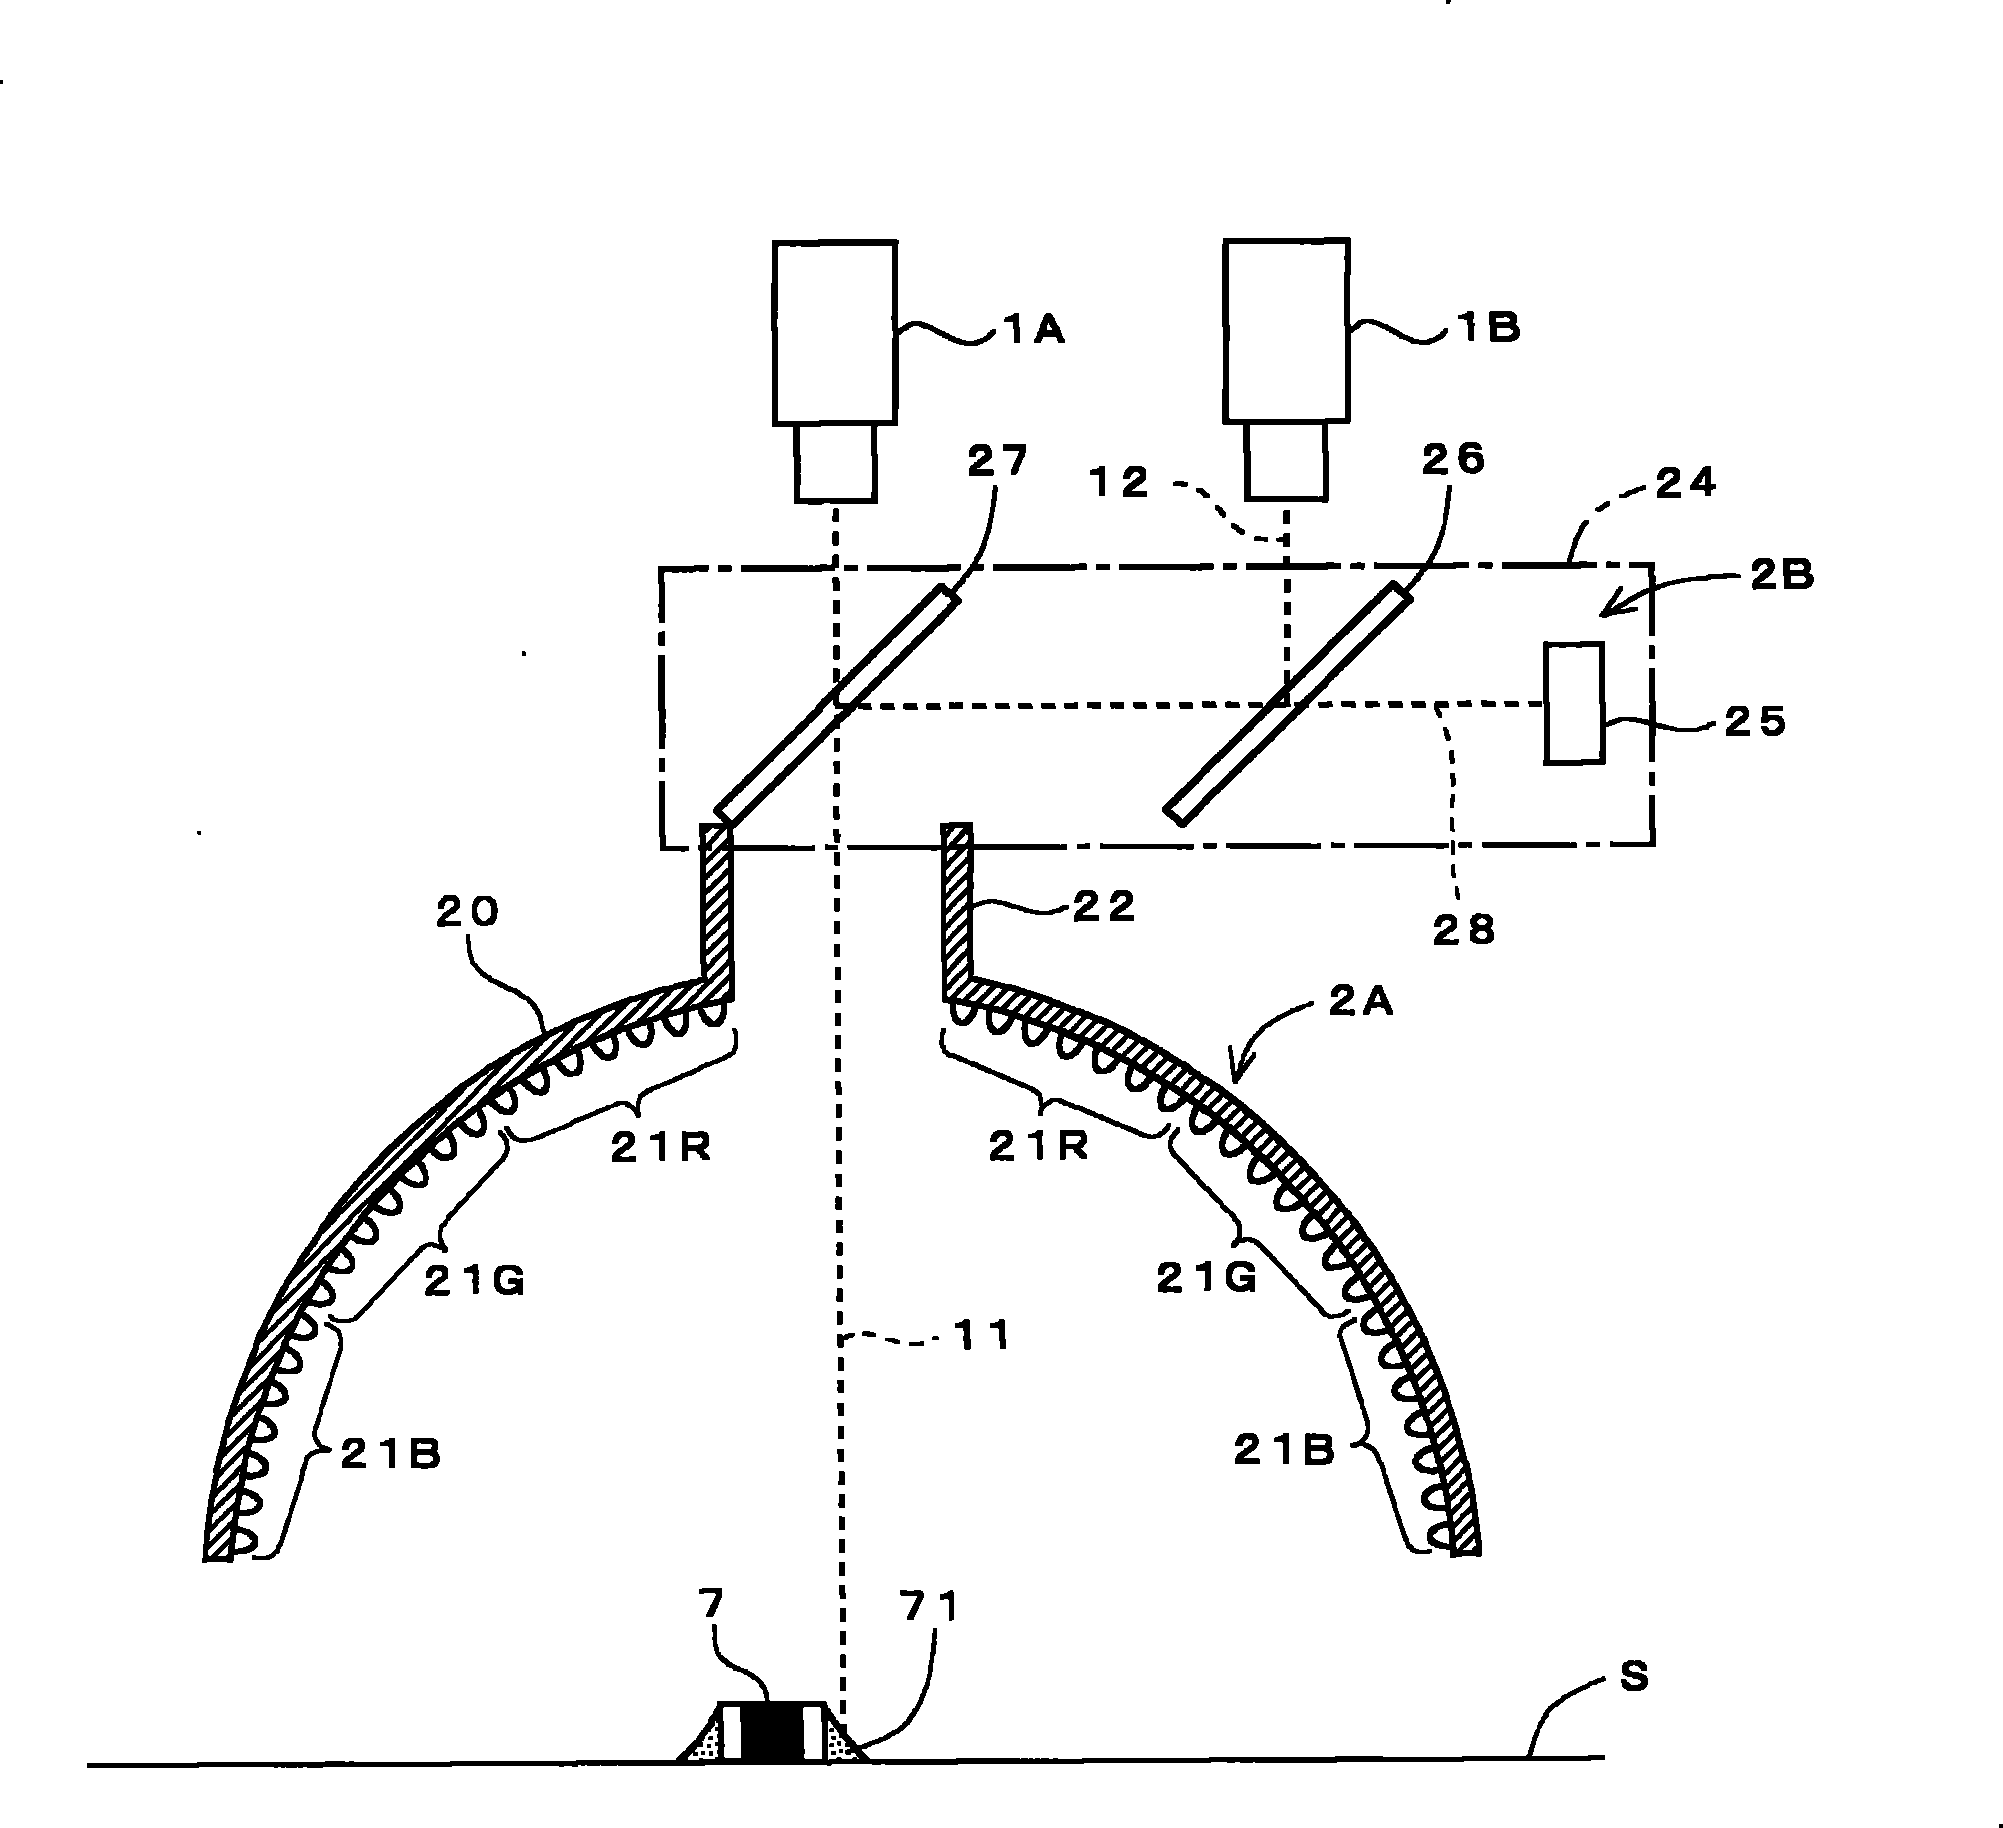 Substrate outer appearance inspection device